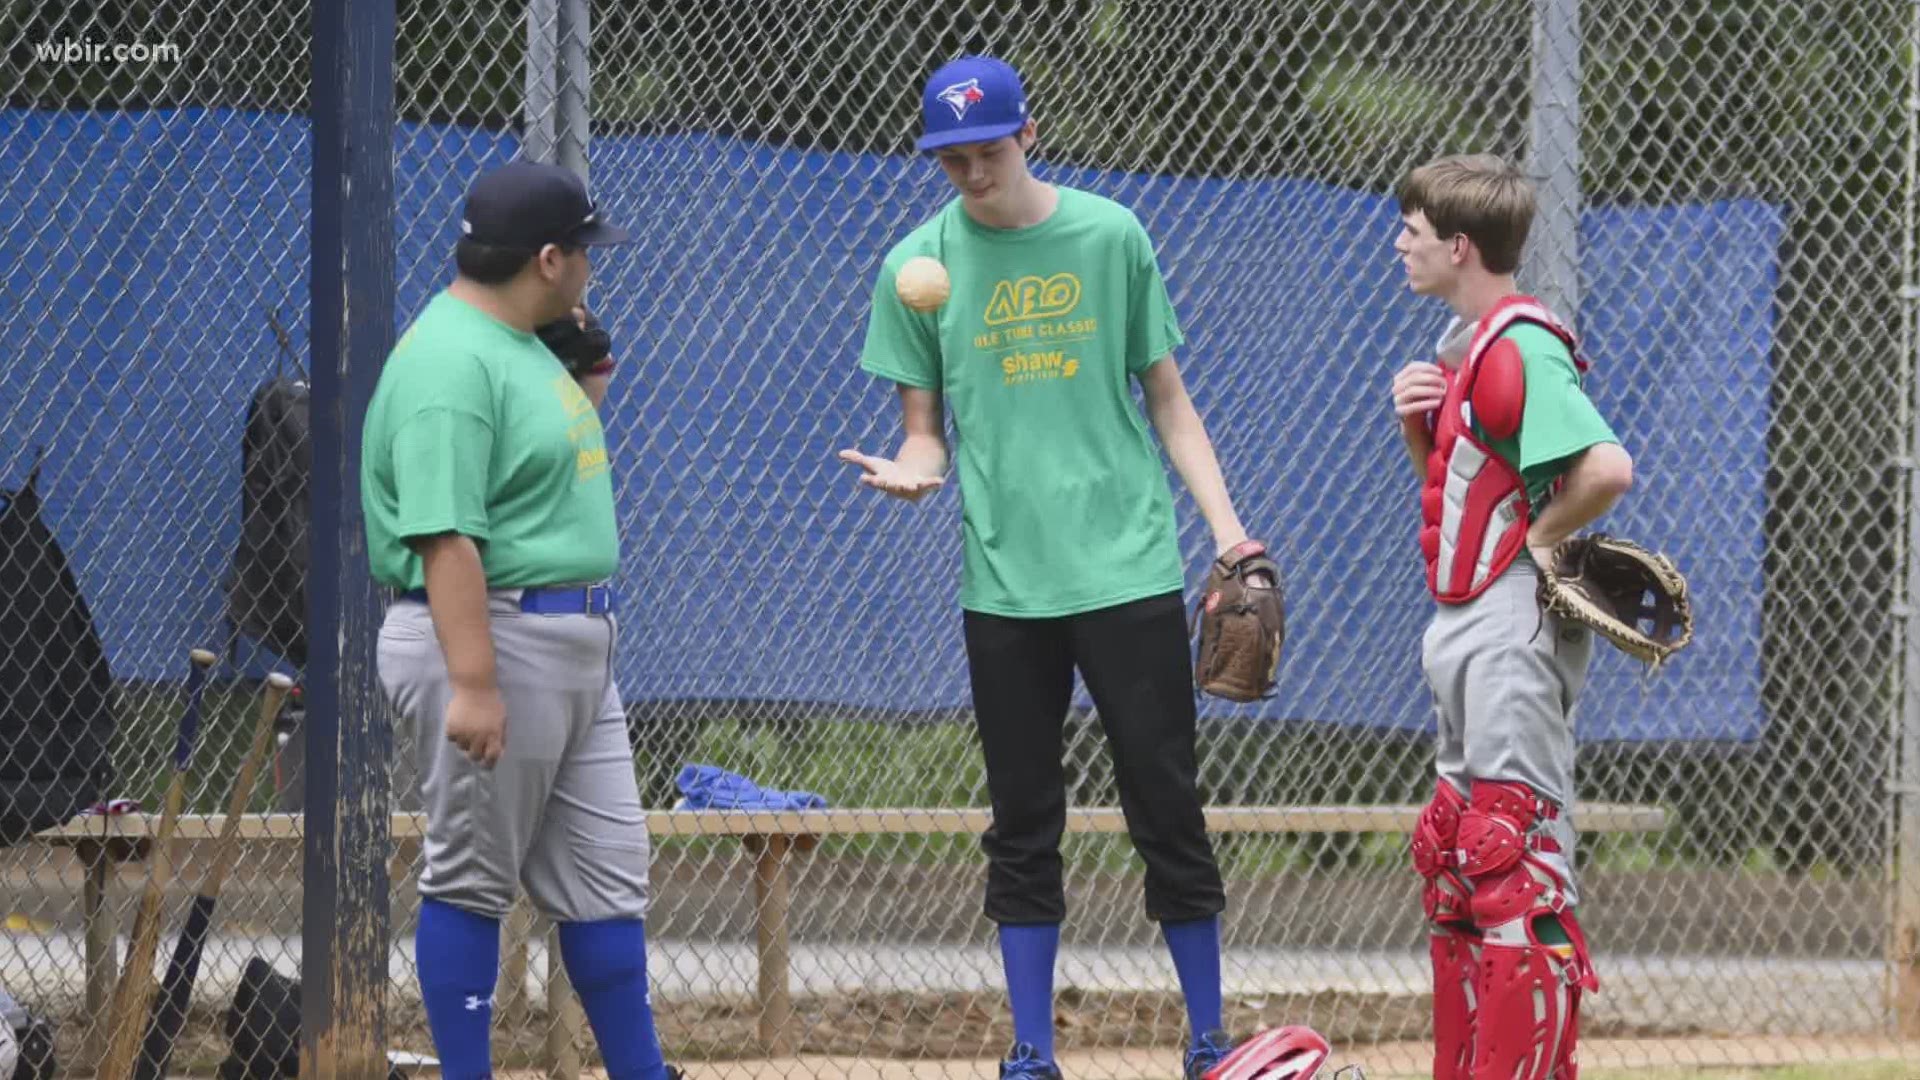 A new baseball league has plans to launch in the Knoxville area next year, it's open thoseoften overlooked for traditional sports. June 24, 2020-4pm.